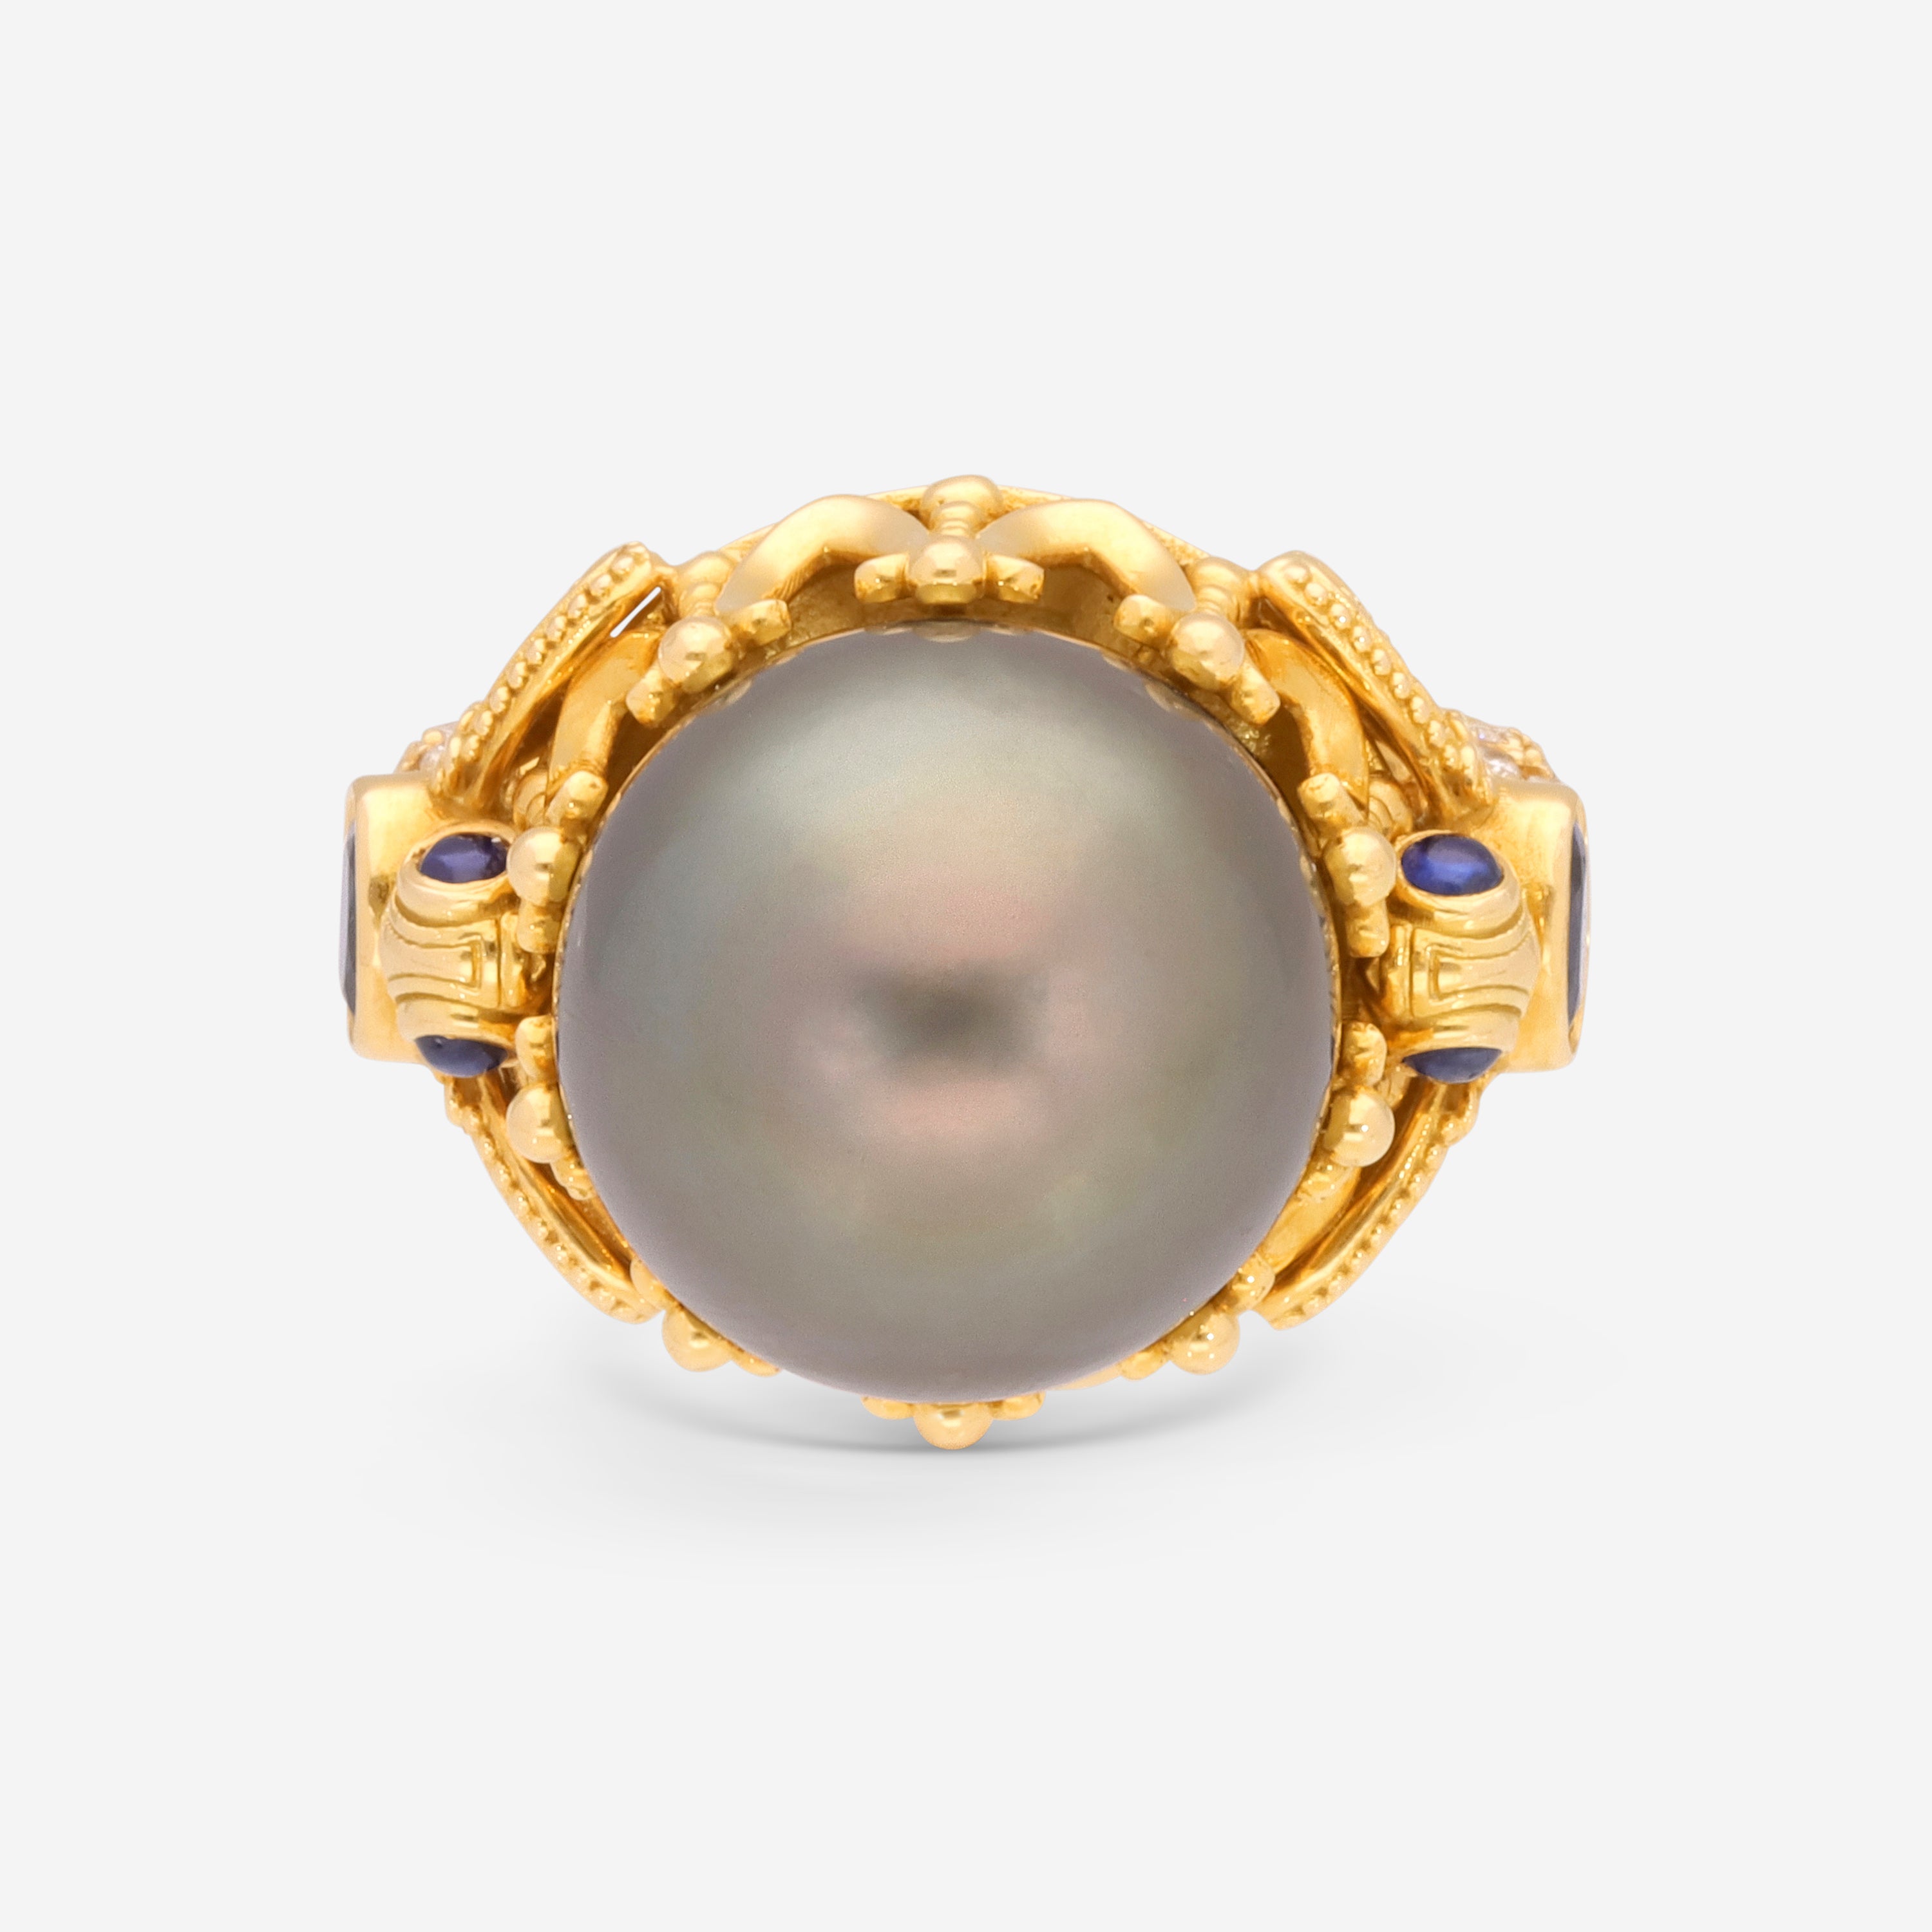 Konstantino Melissa 18K Yellow Gold, Blue Sapphire and Black Pearl Ring  200140 - THE SOLIST